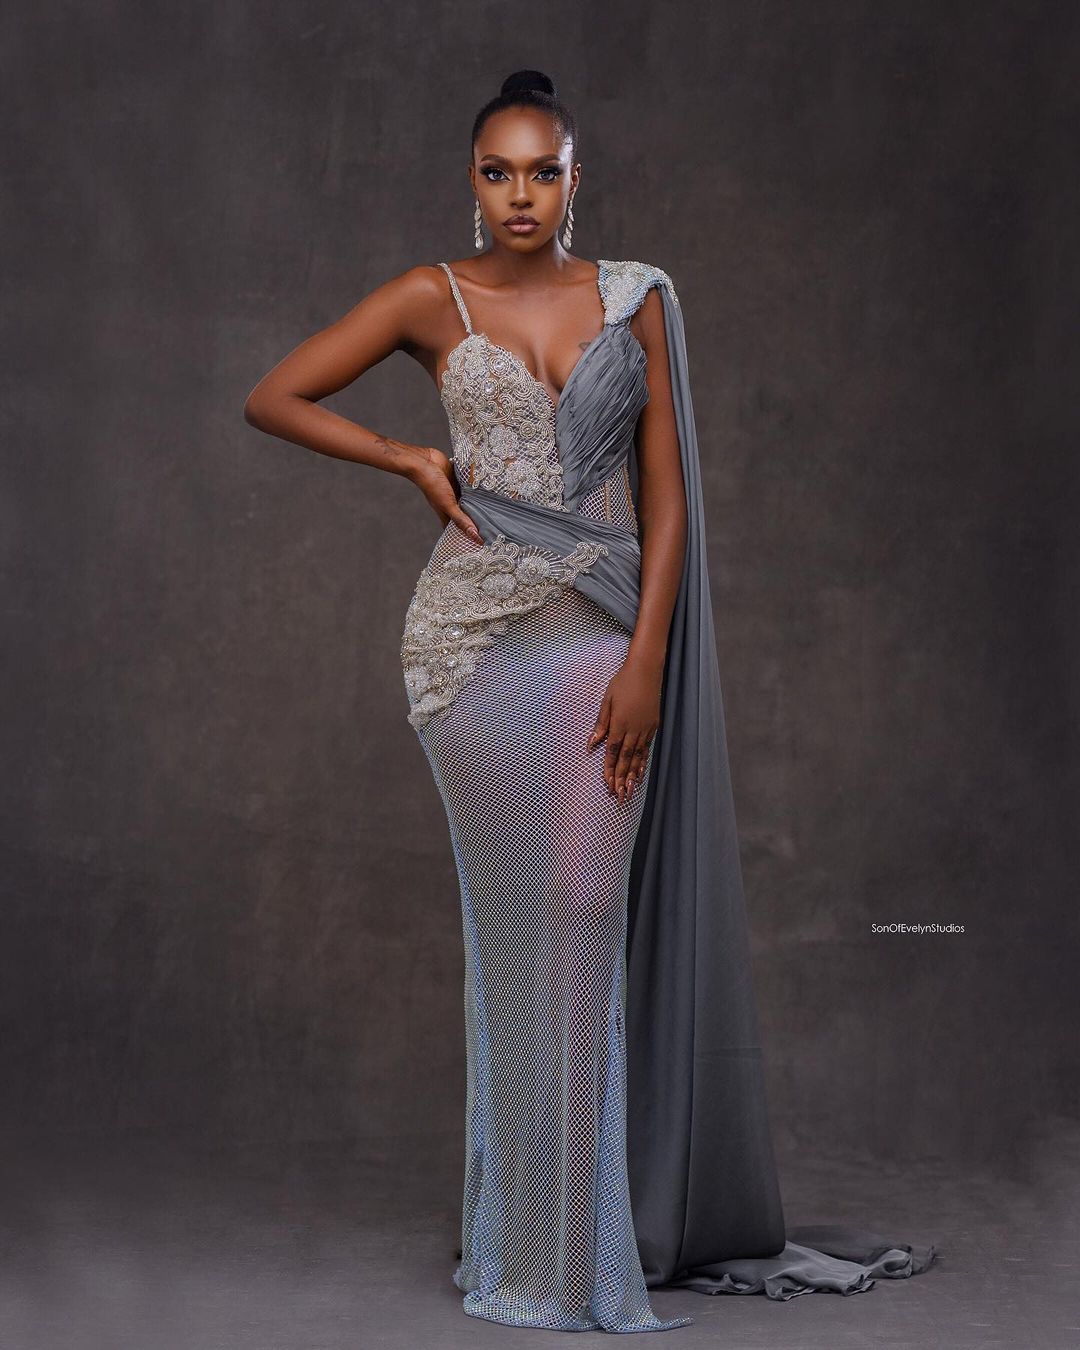 Beverly Osu- Elegant And Lit For The Gram